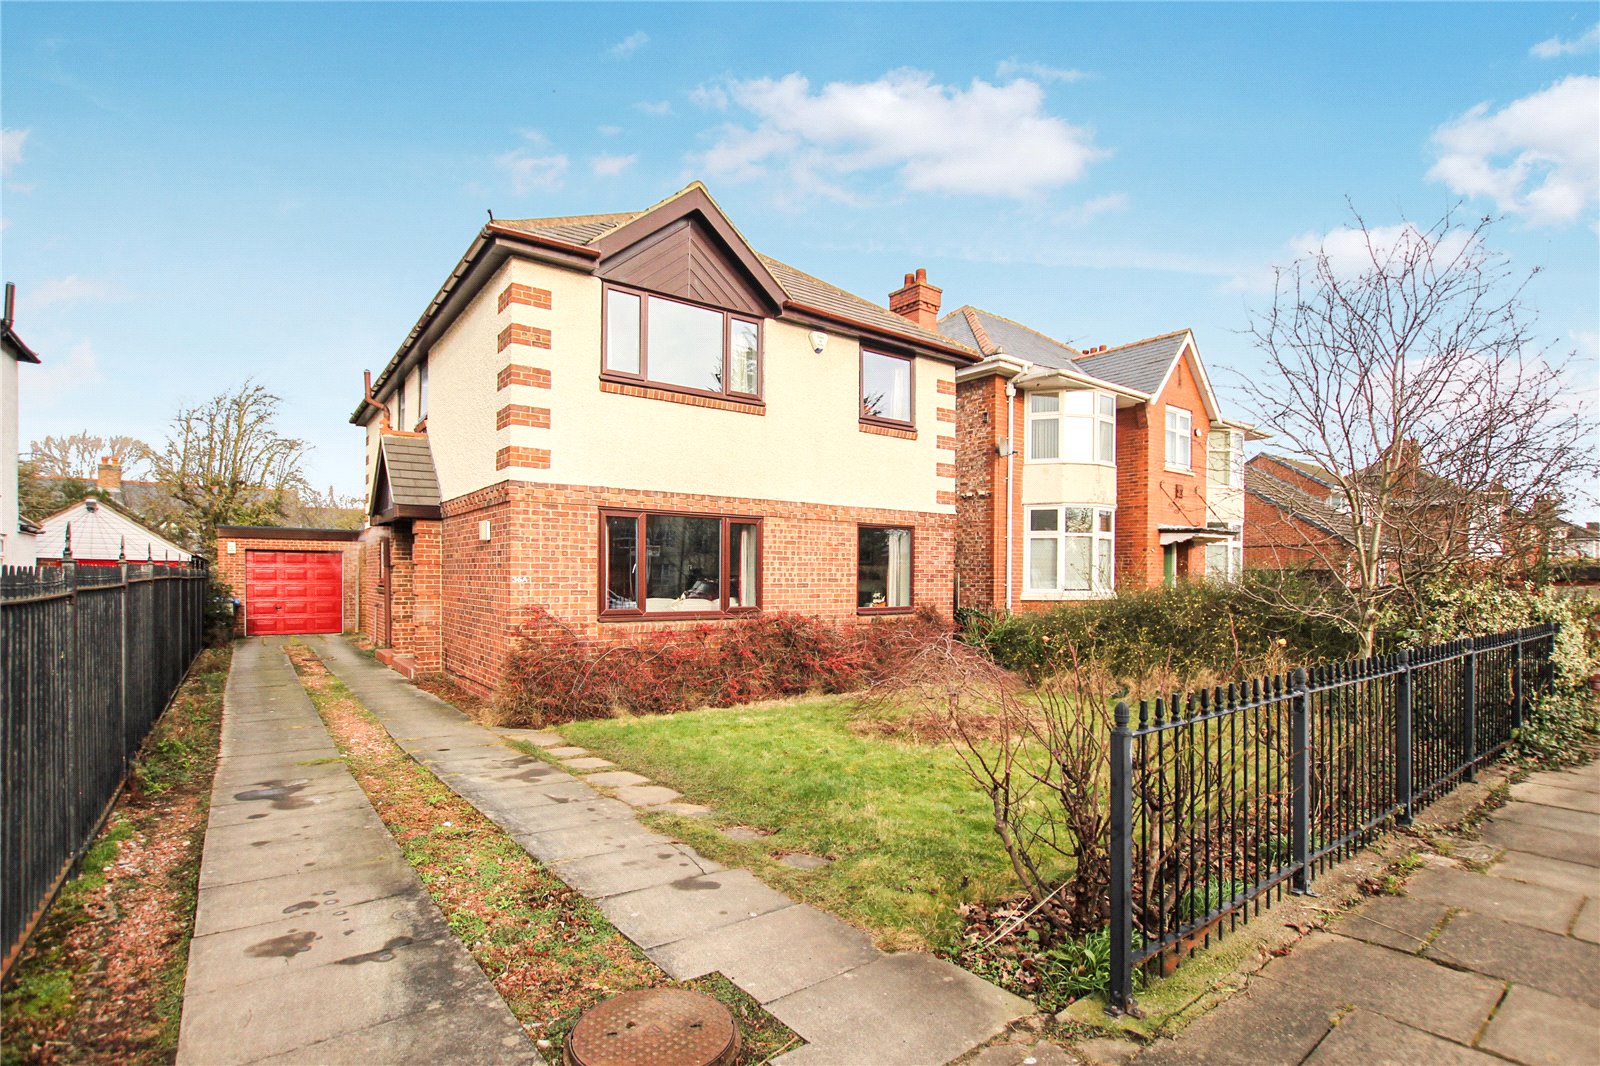 4 bed house for sale in Harrow Road, Linthorpe - Property Image 1